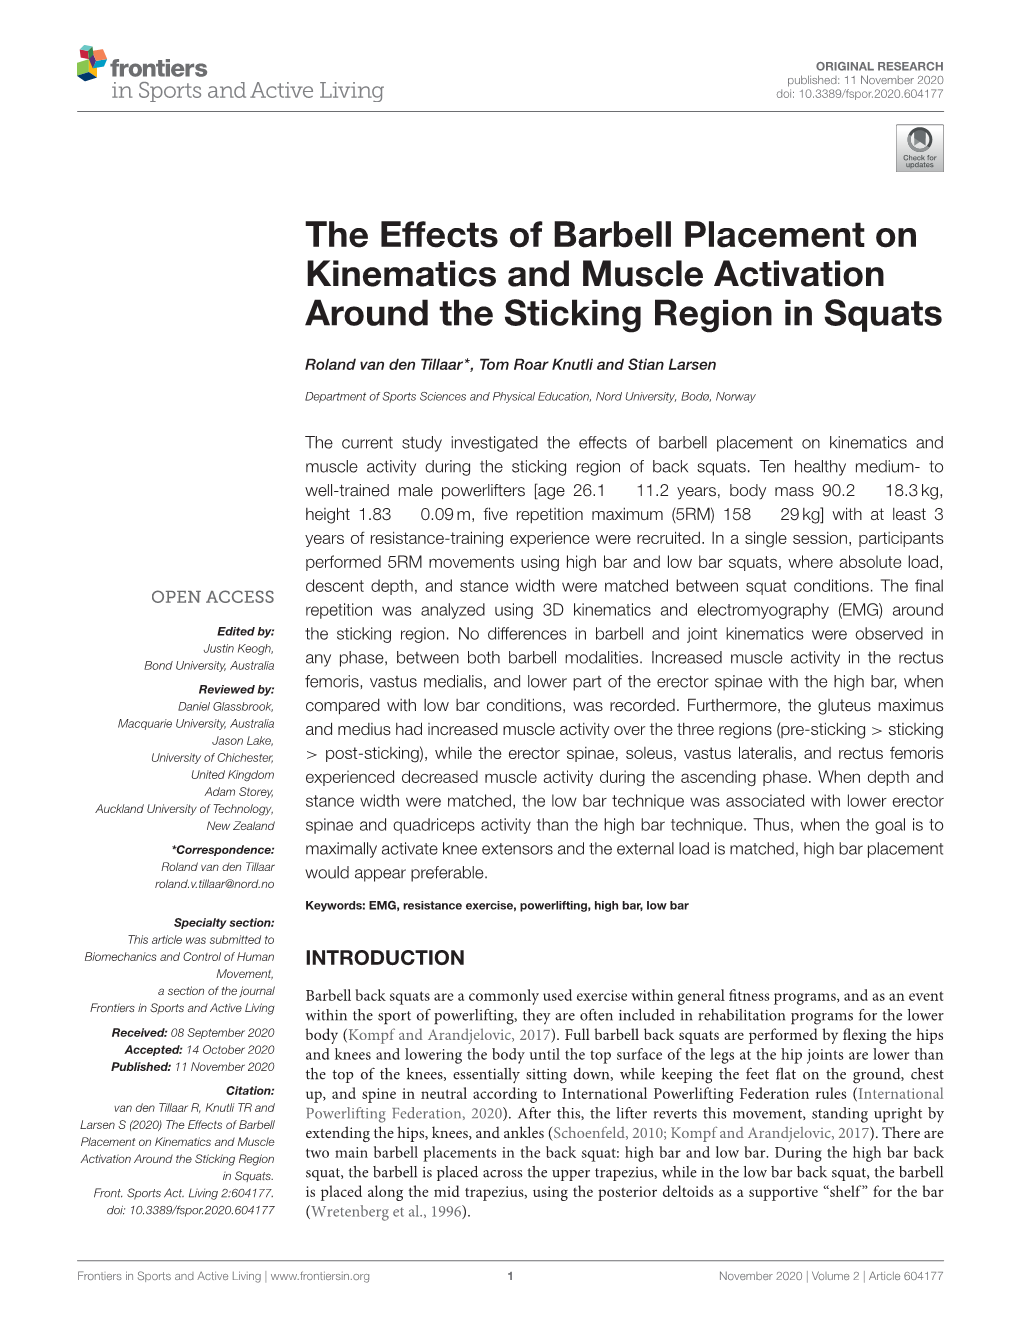 The Effects of Barbell Placement on Kinematics and Muscle Activation Around the Sticking Region in Squats